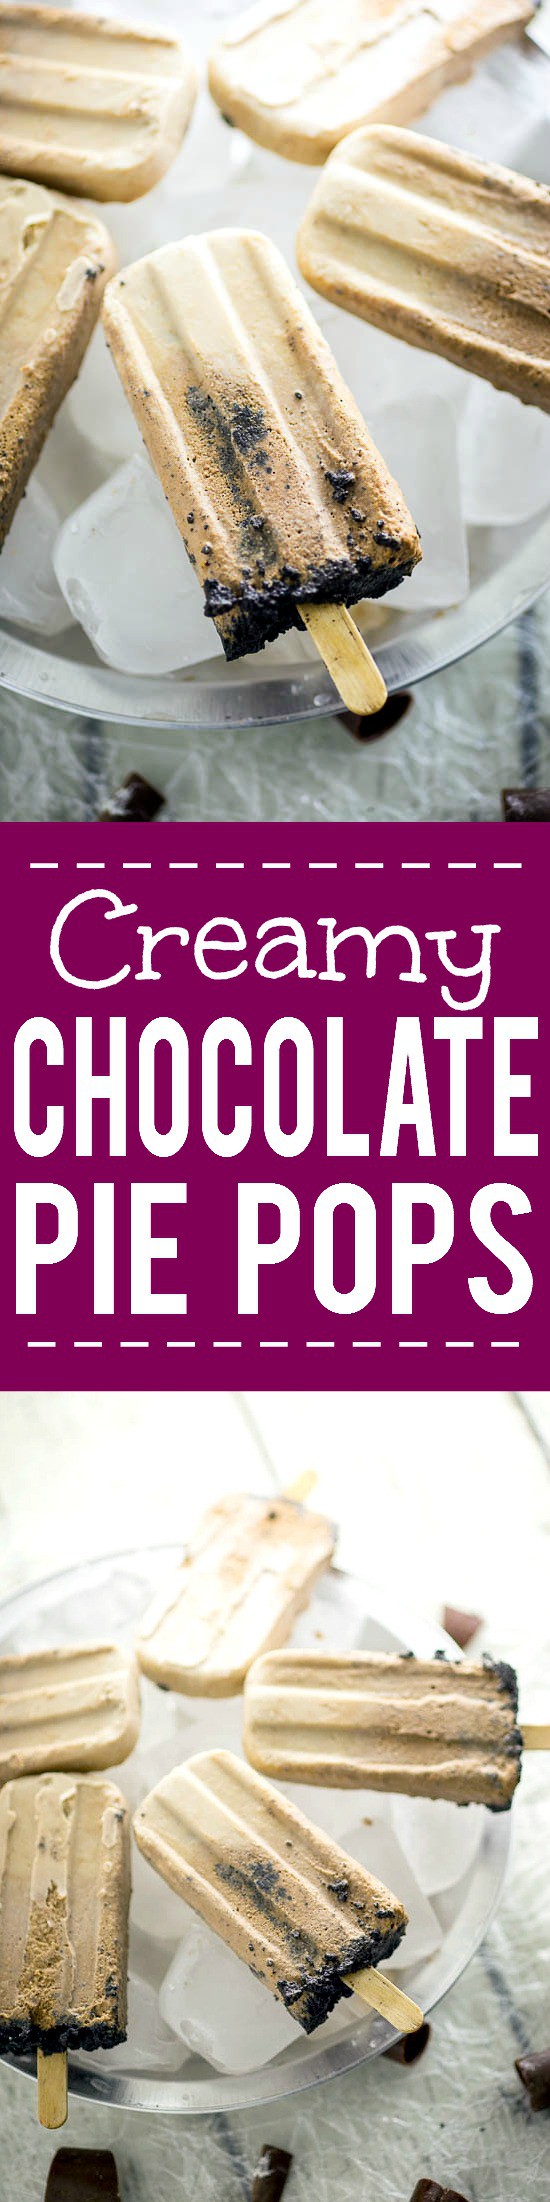 Creamy Chocolate Pie Pops Recipe - Make this quick and easy no bake dessert Creamy Chocolate Pie Pops recipe with just 2 ingredients. These are SO good. Taste just like fudgsicles. 